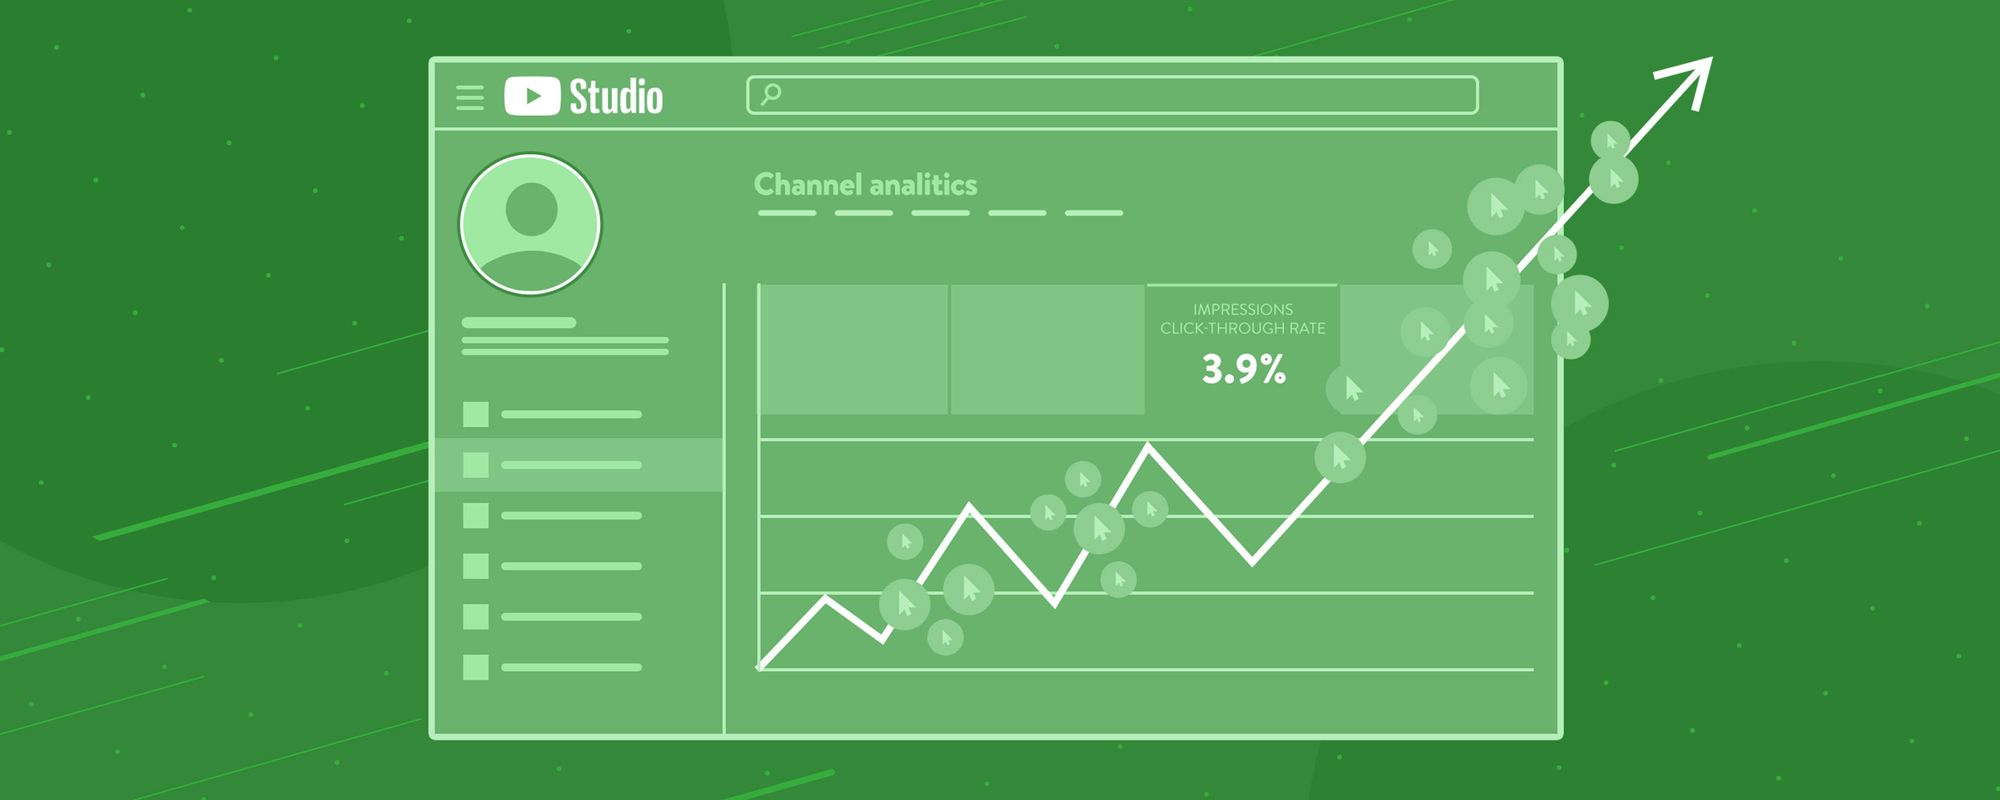 Illustration of how click-through rate is displayed in YouTube Studio.